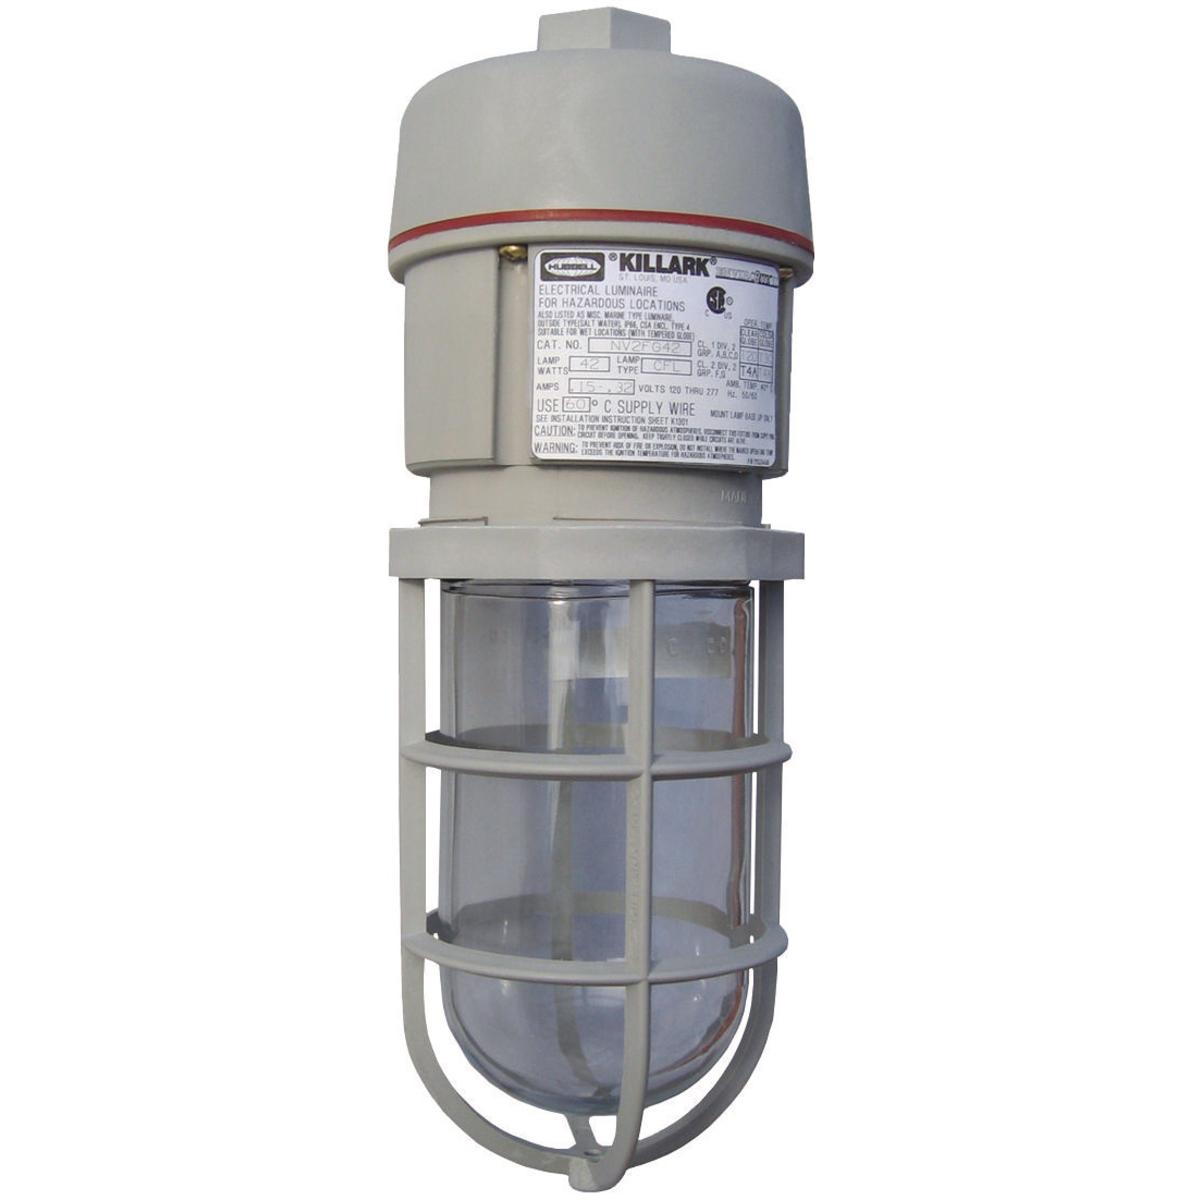 Hubbell NV2FG42ASG 42W 120-277V Fluorescent Pendant with Standard Globe and Guard  ; NV2 Series non-metallic light fixtures combine an outstanding balance of strength, stiffness, toughness and electrical properties ; Energy and labor saving fluorescent or incandescent model